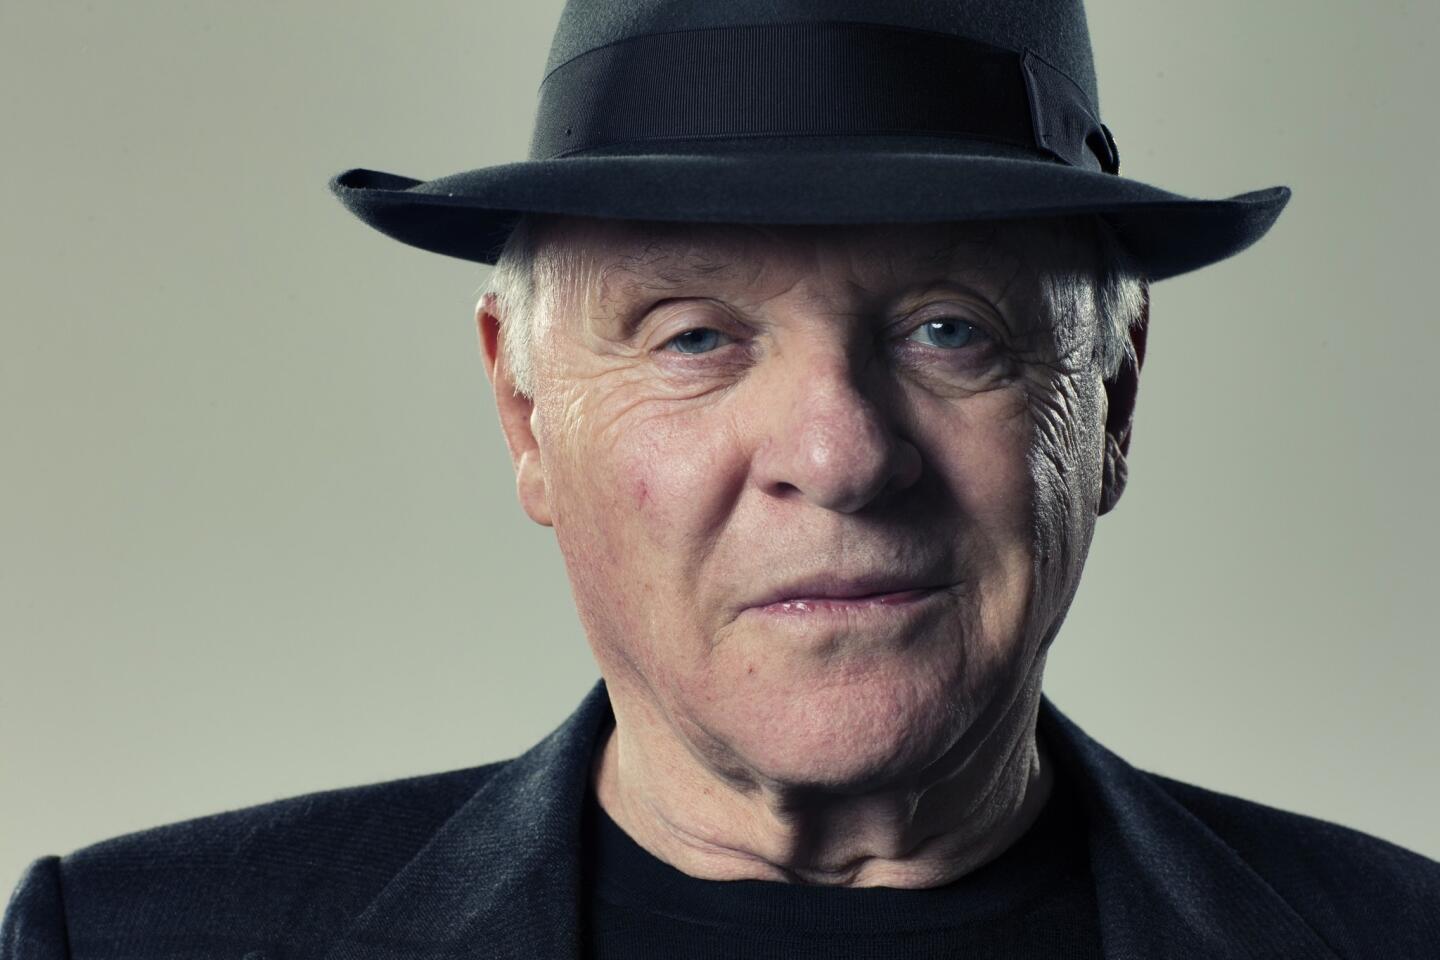 Anthony Hopkins may be "Breaking Bad's" biggest fan